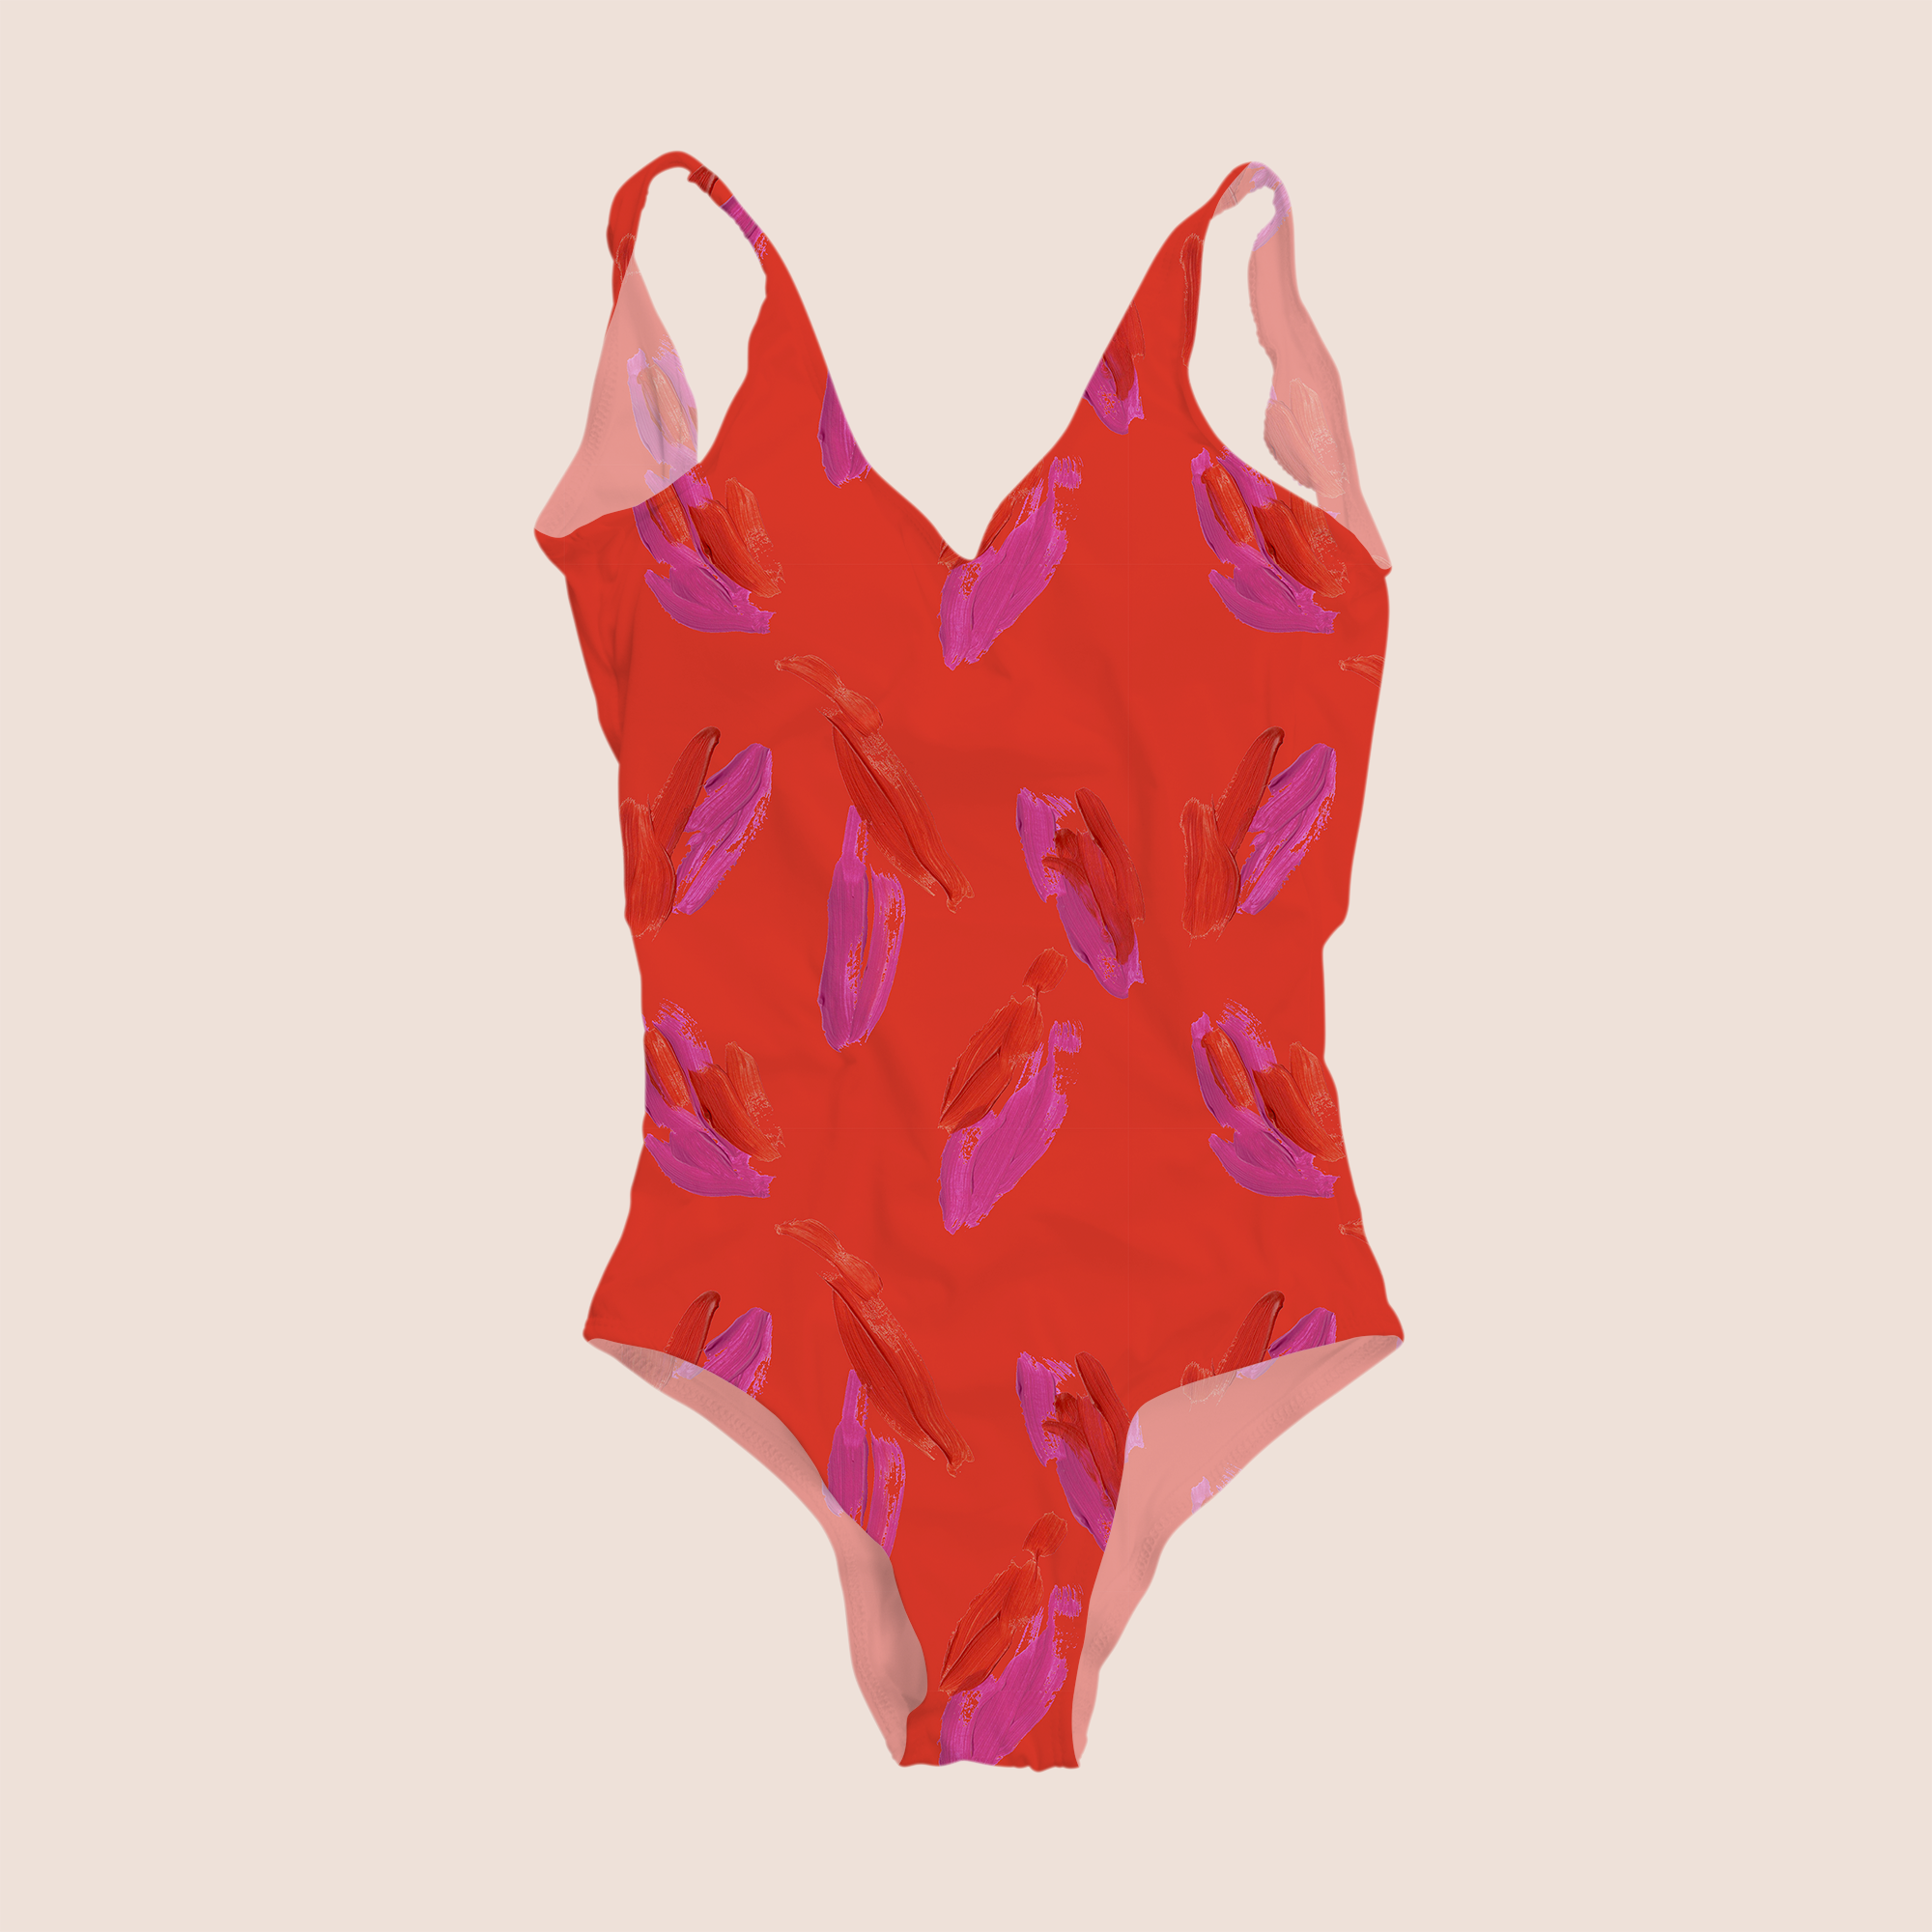 Paint brush strokes red and pink in red pattern design printed on recycled fabric lycra mockup